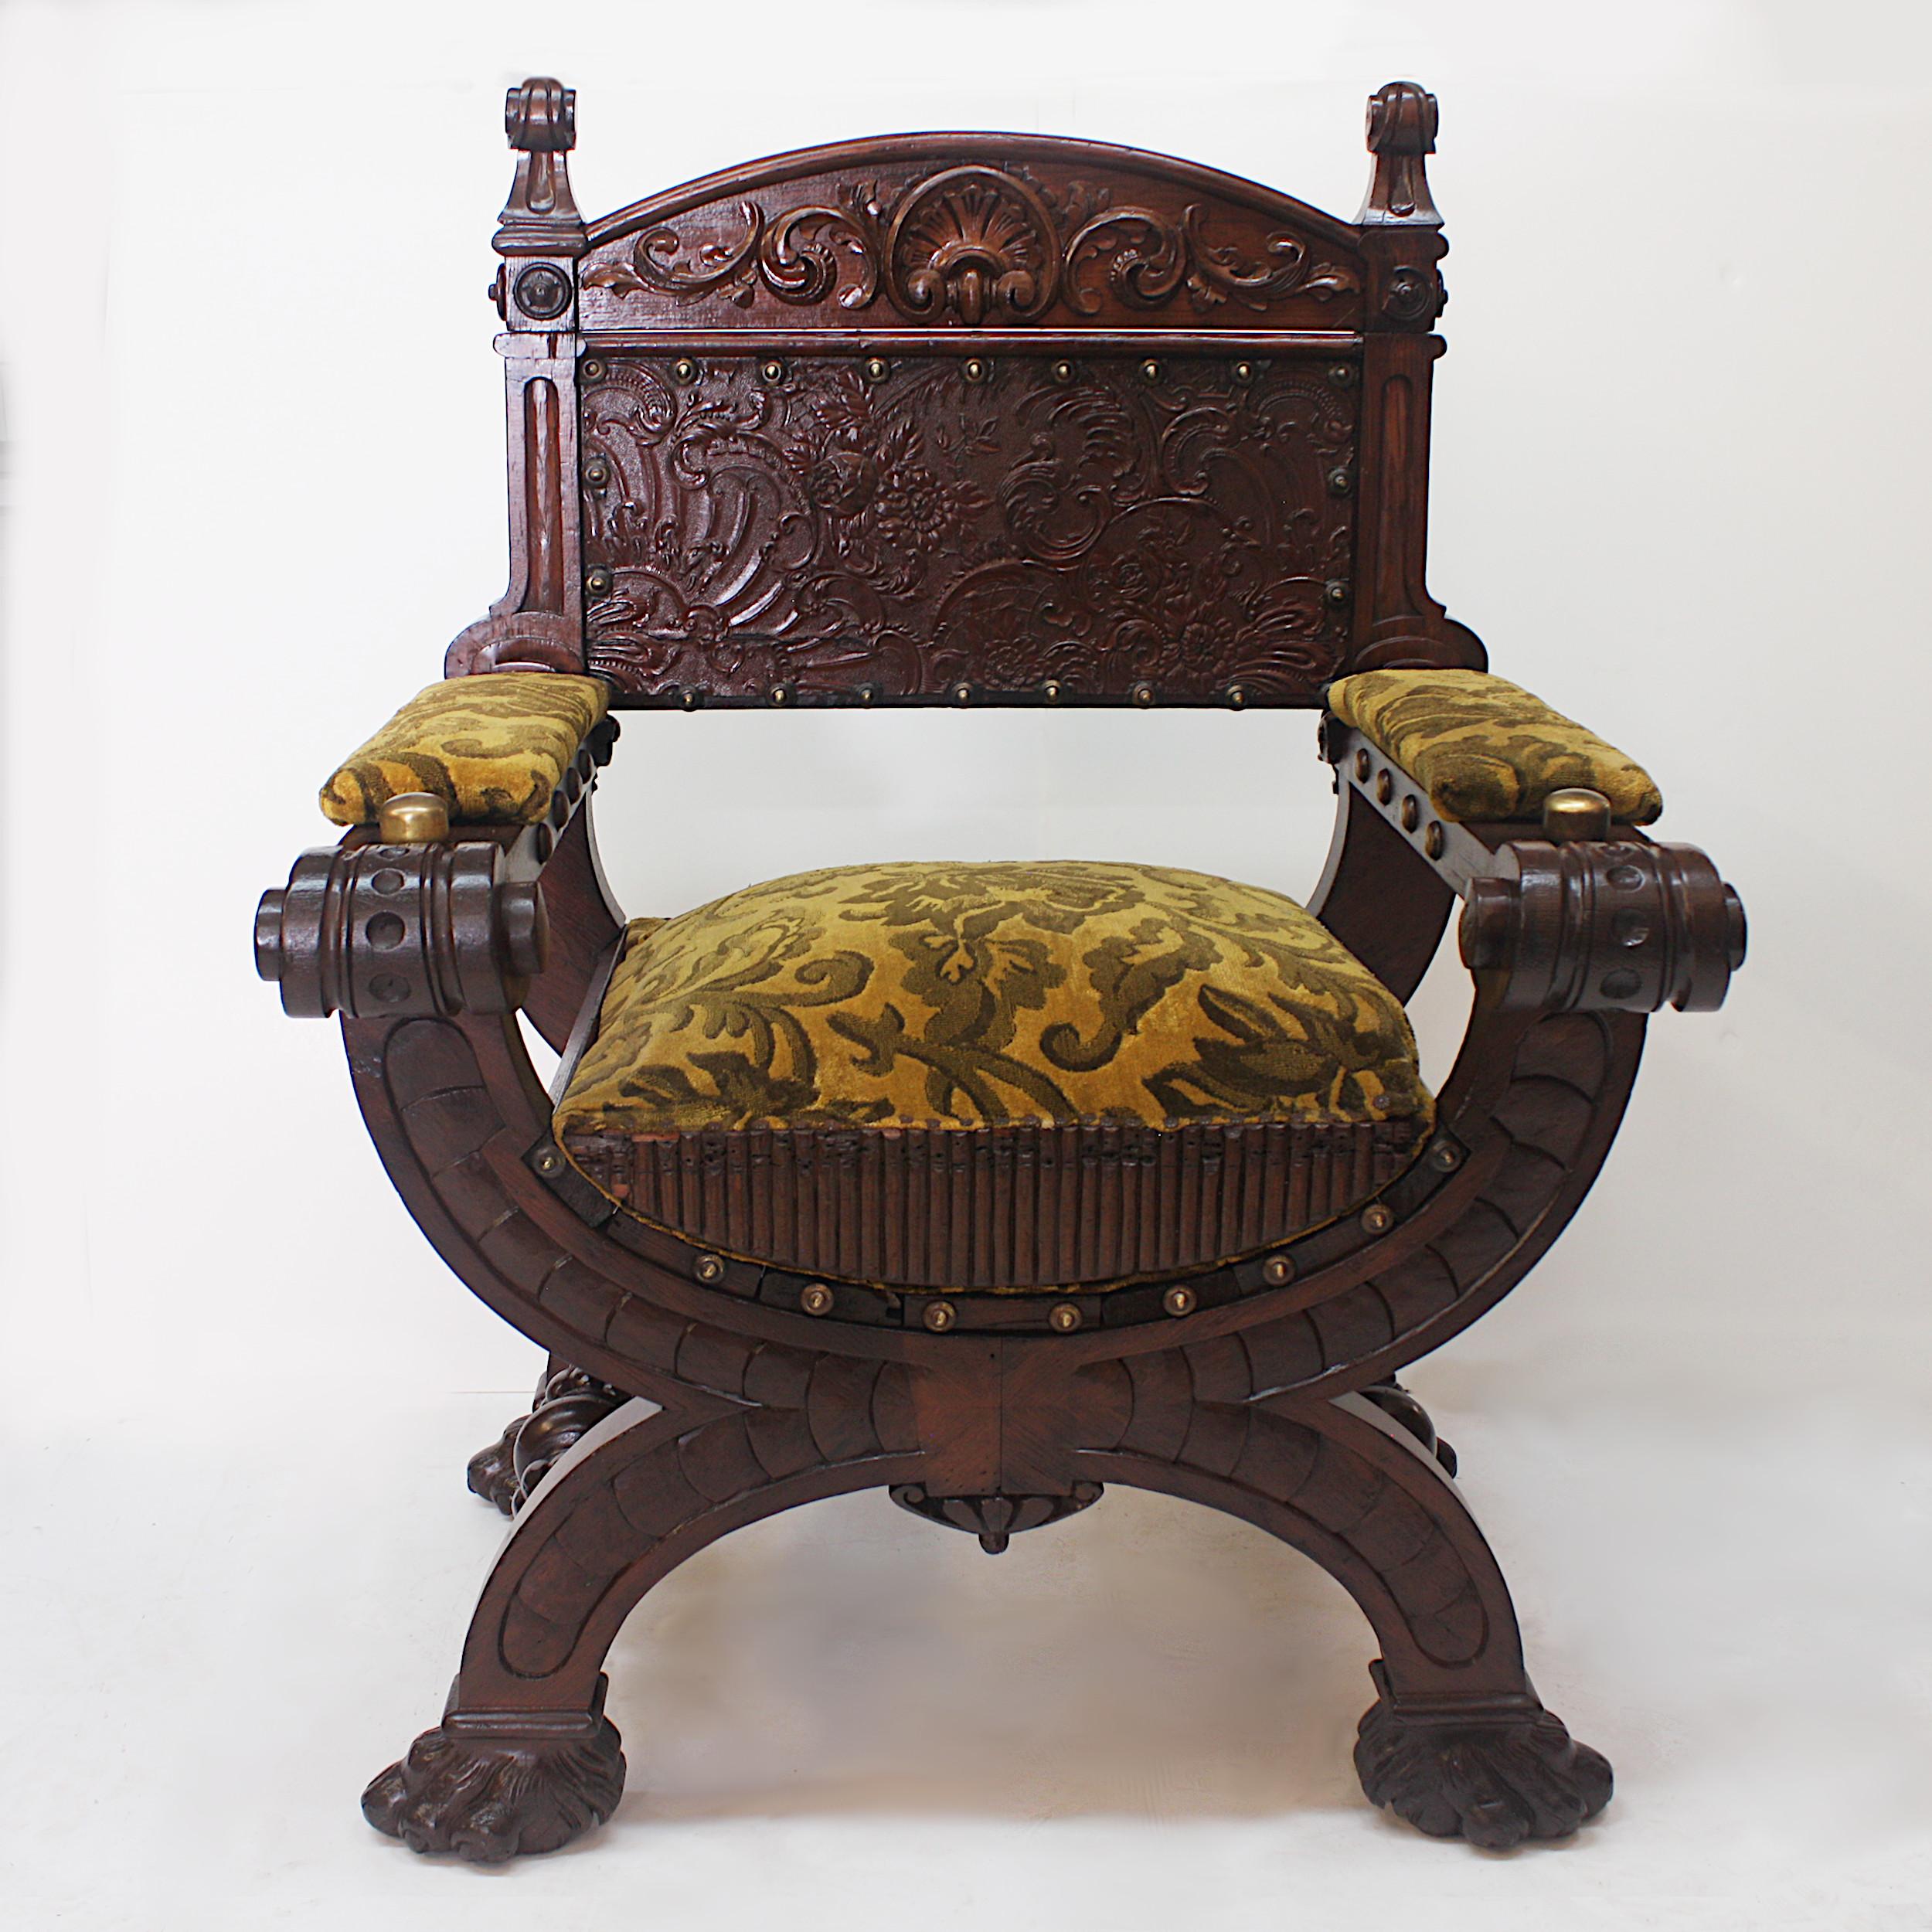 Unusual Early 20th Century Photographer's Posing Chair with Ornate Carving In Good Condition For Sale In Lafayette, IN